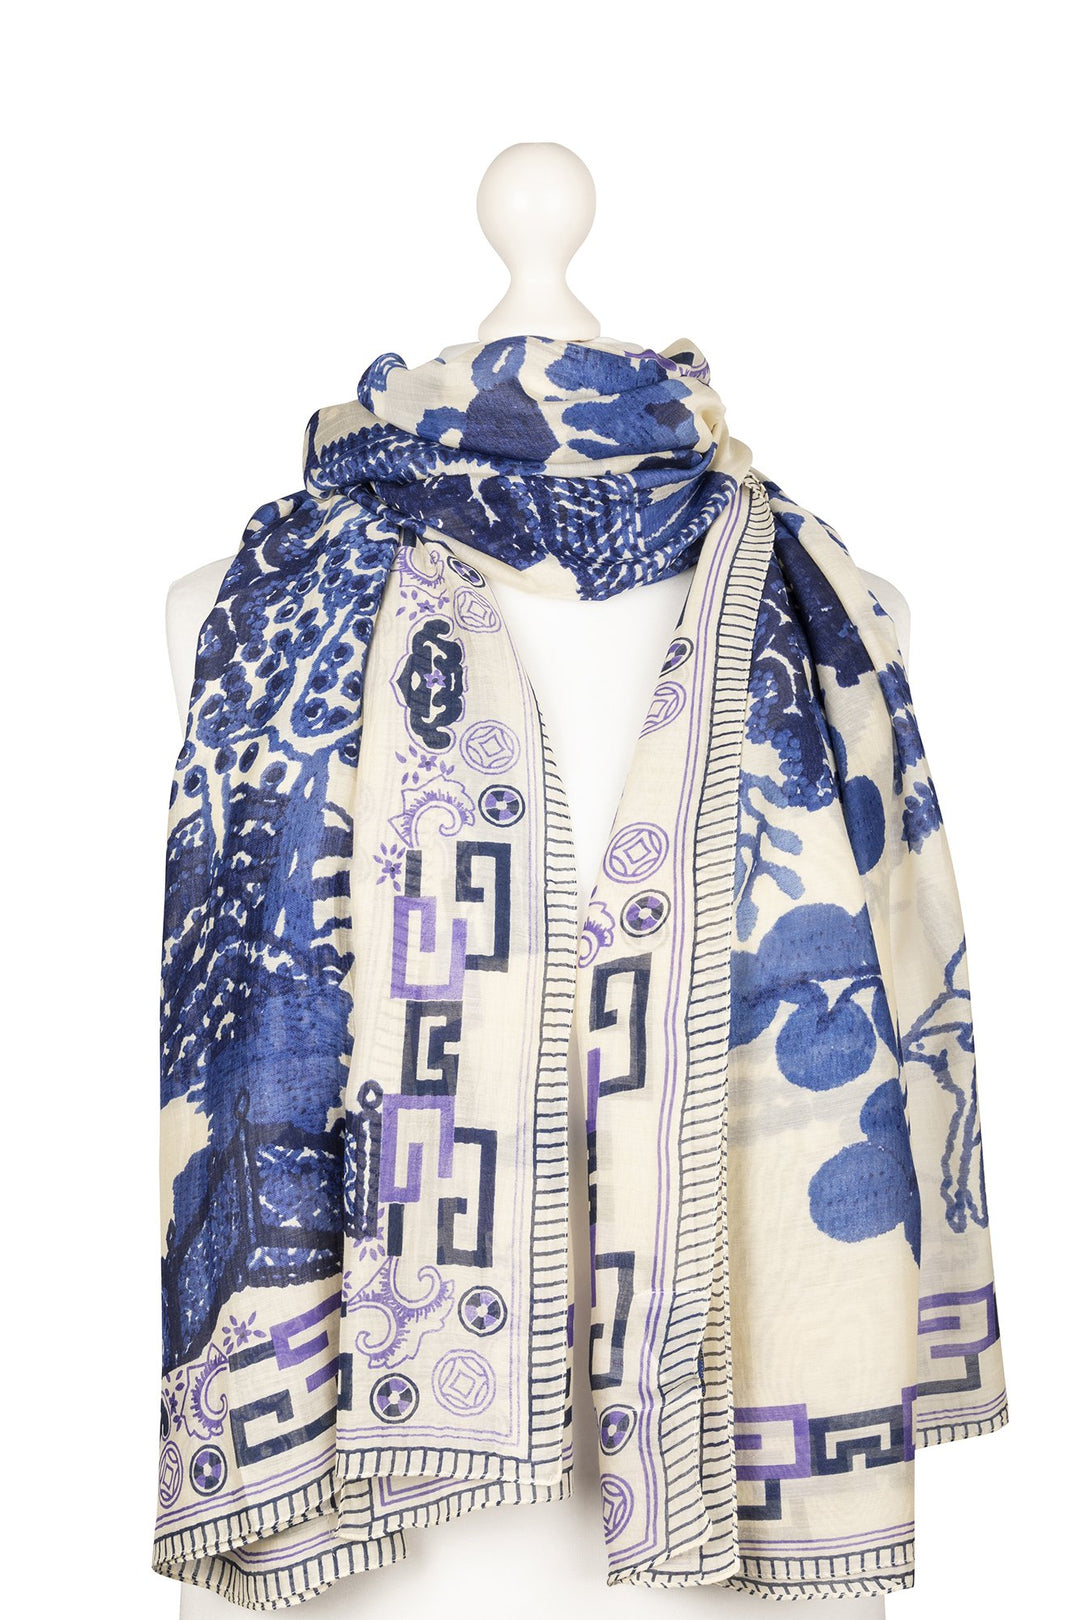 One Hundred Stars Giant Willow is a vintage inspired blue and white willow pattern, similar prints can be found used in pottery this long scarf is 1m x 2x in length and perfect for layering in the winter or as a shawl in summer